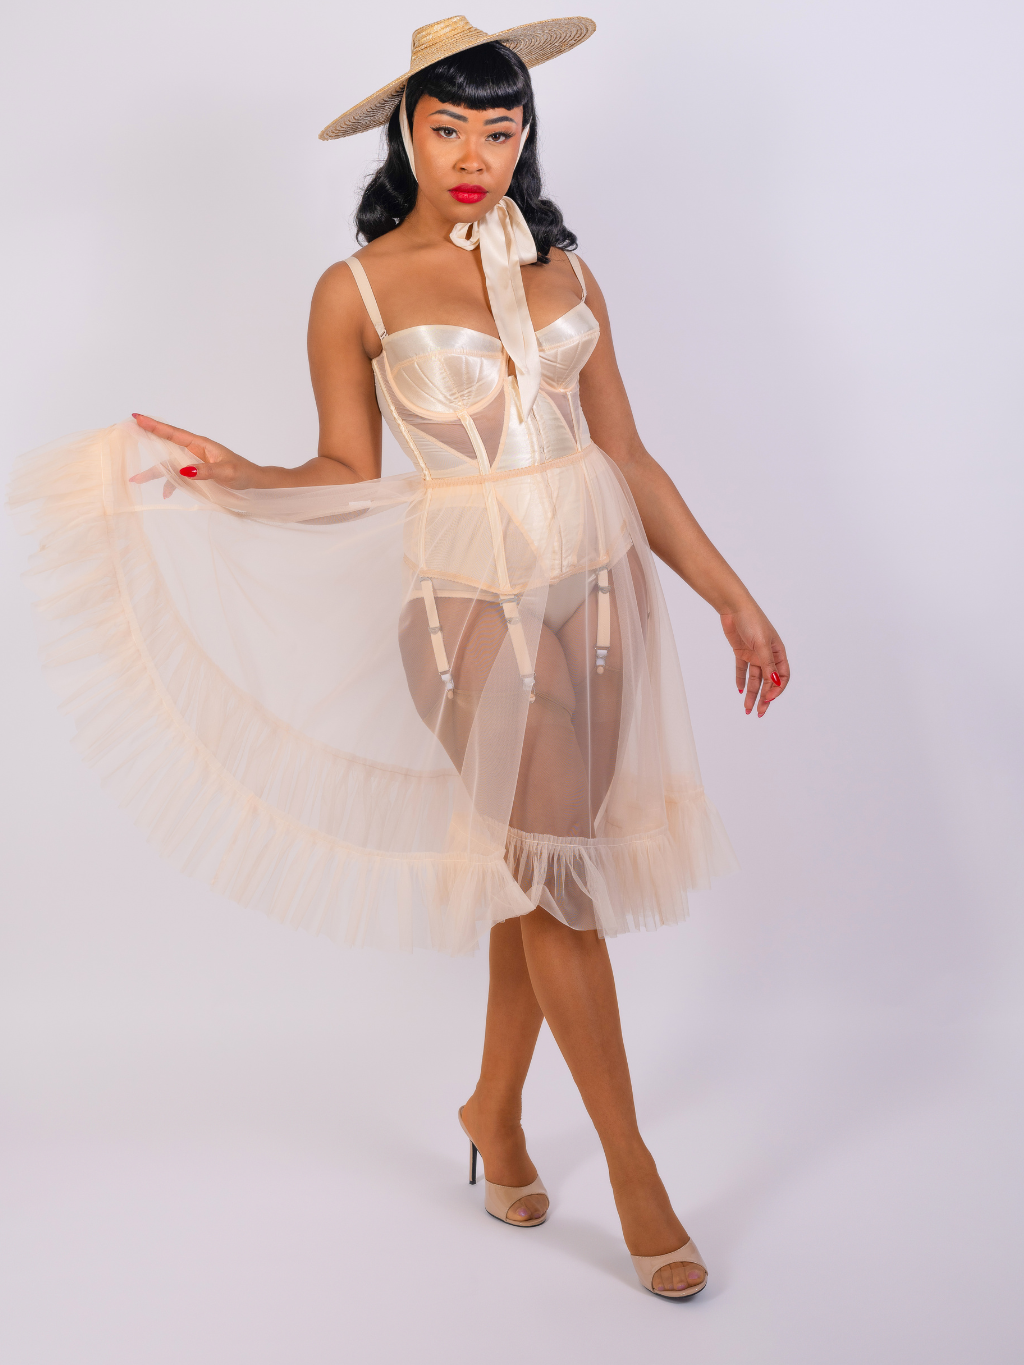 sheer nylon frilly petticoat in vintage peach nylon worn with matching 1950s lingerie and seamed stockings